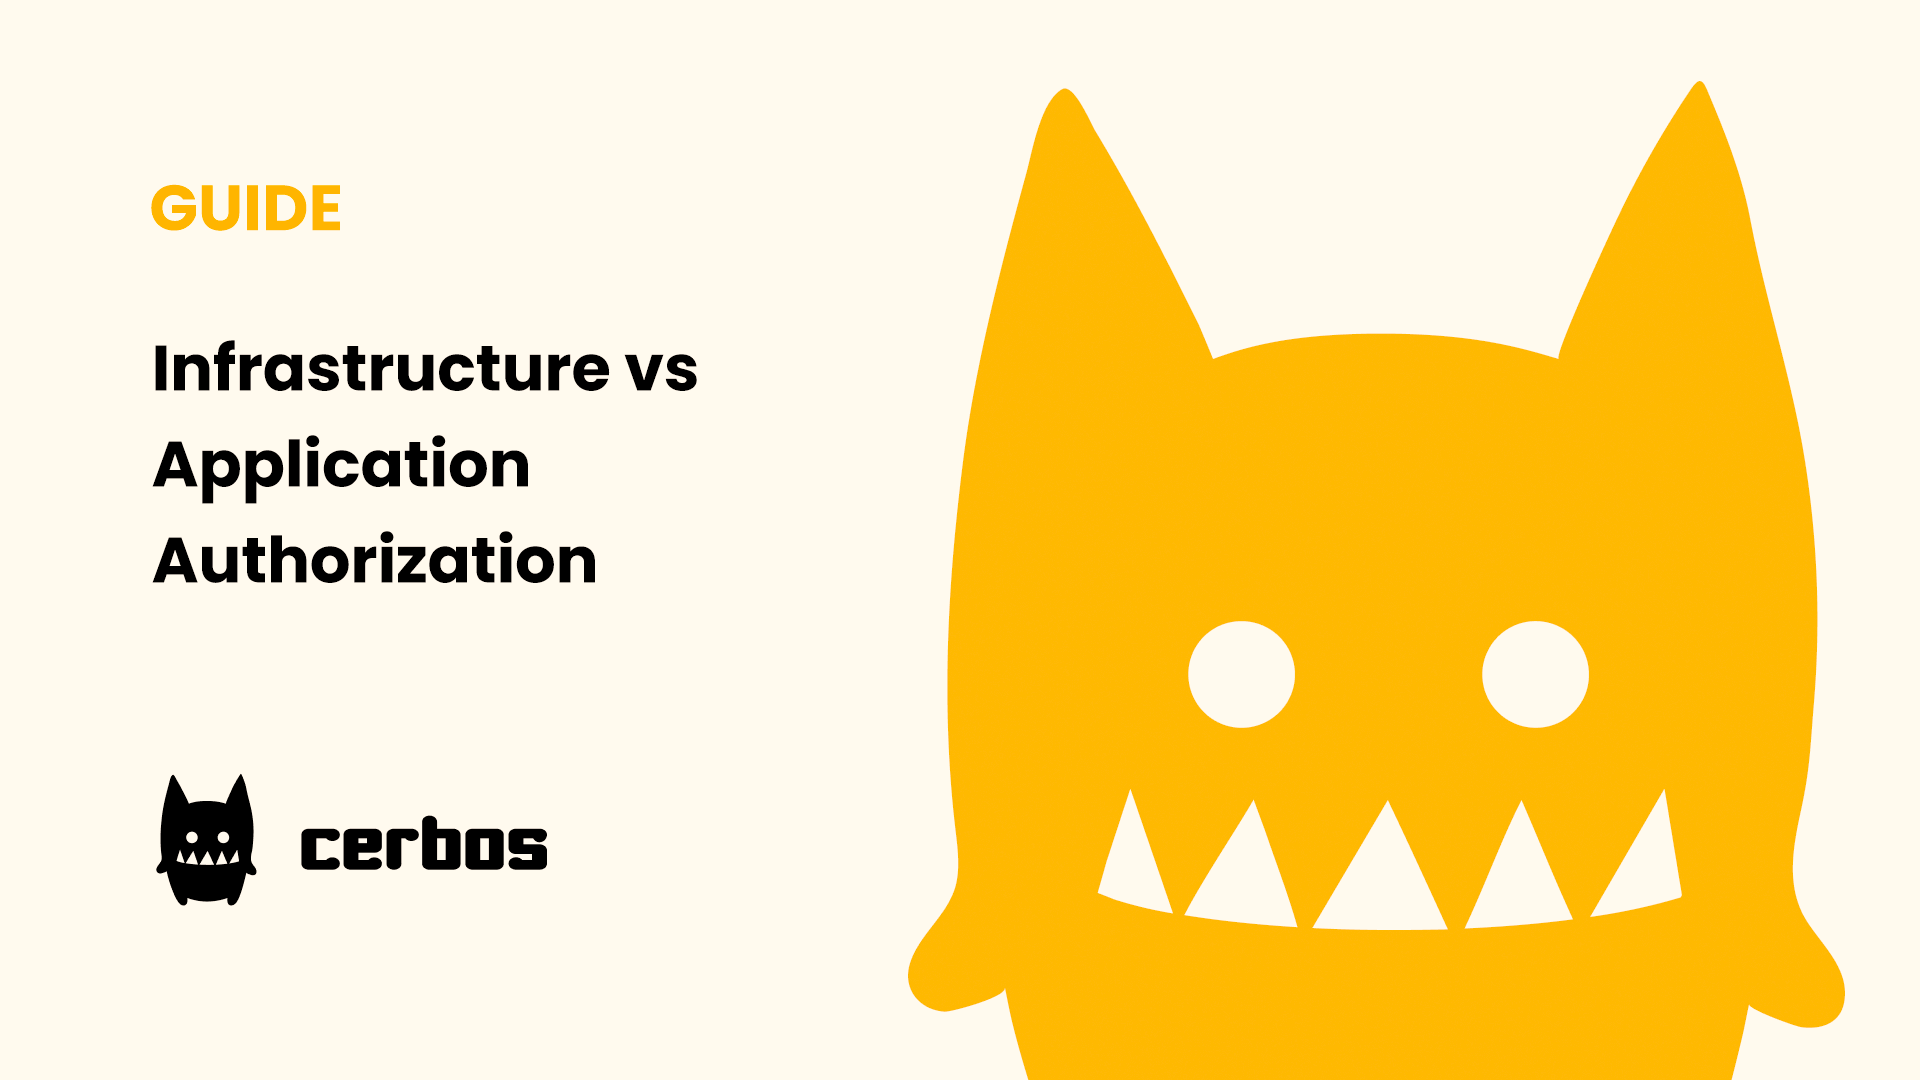 Infrastructure vs Application Authorization